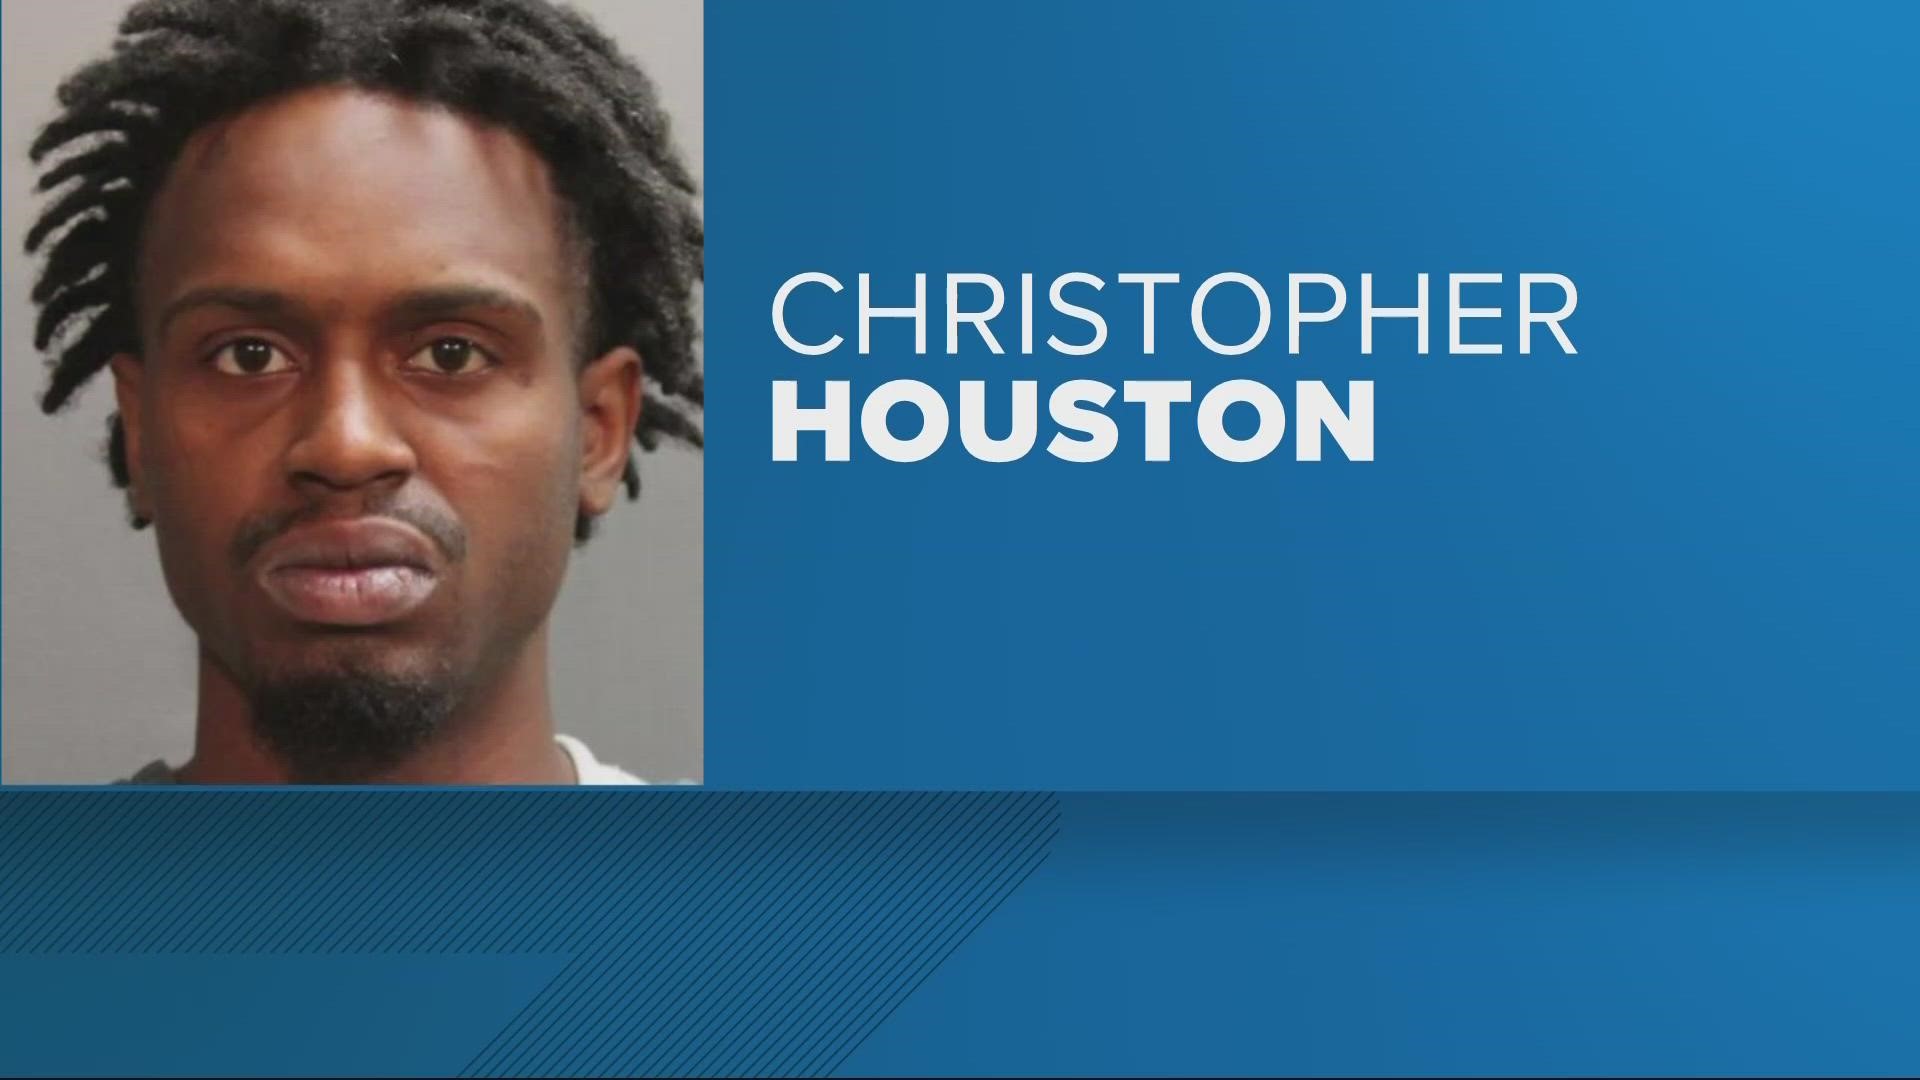 Christopher Houston, 31, has been charged with manslaughter in the shooting death of a man Saturday in the 9300 block of Thunderbolt Drive.